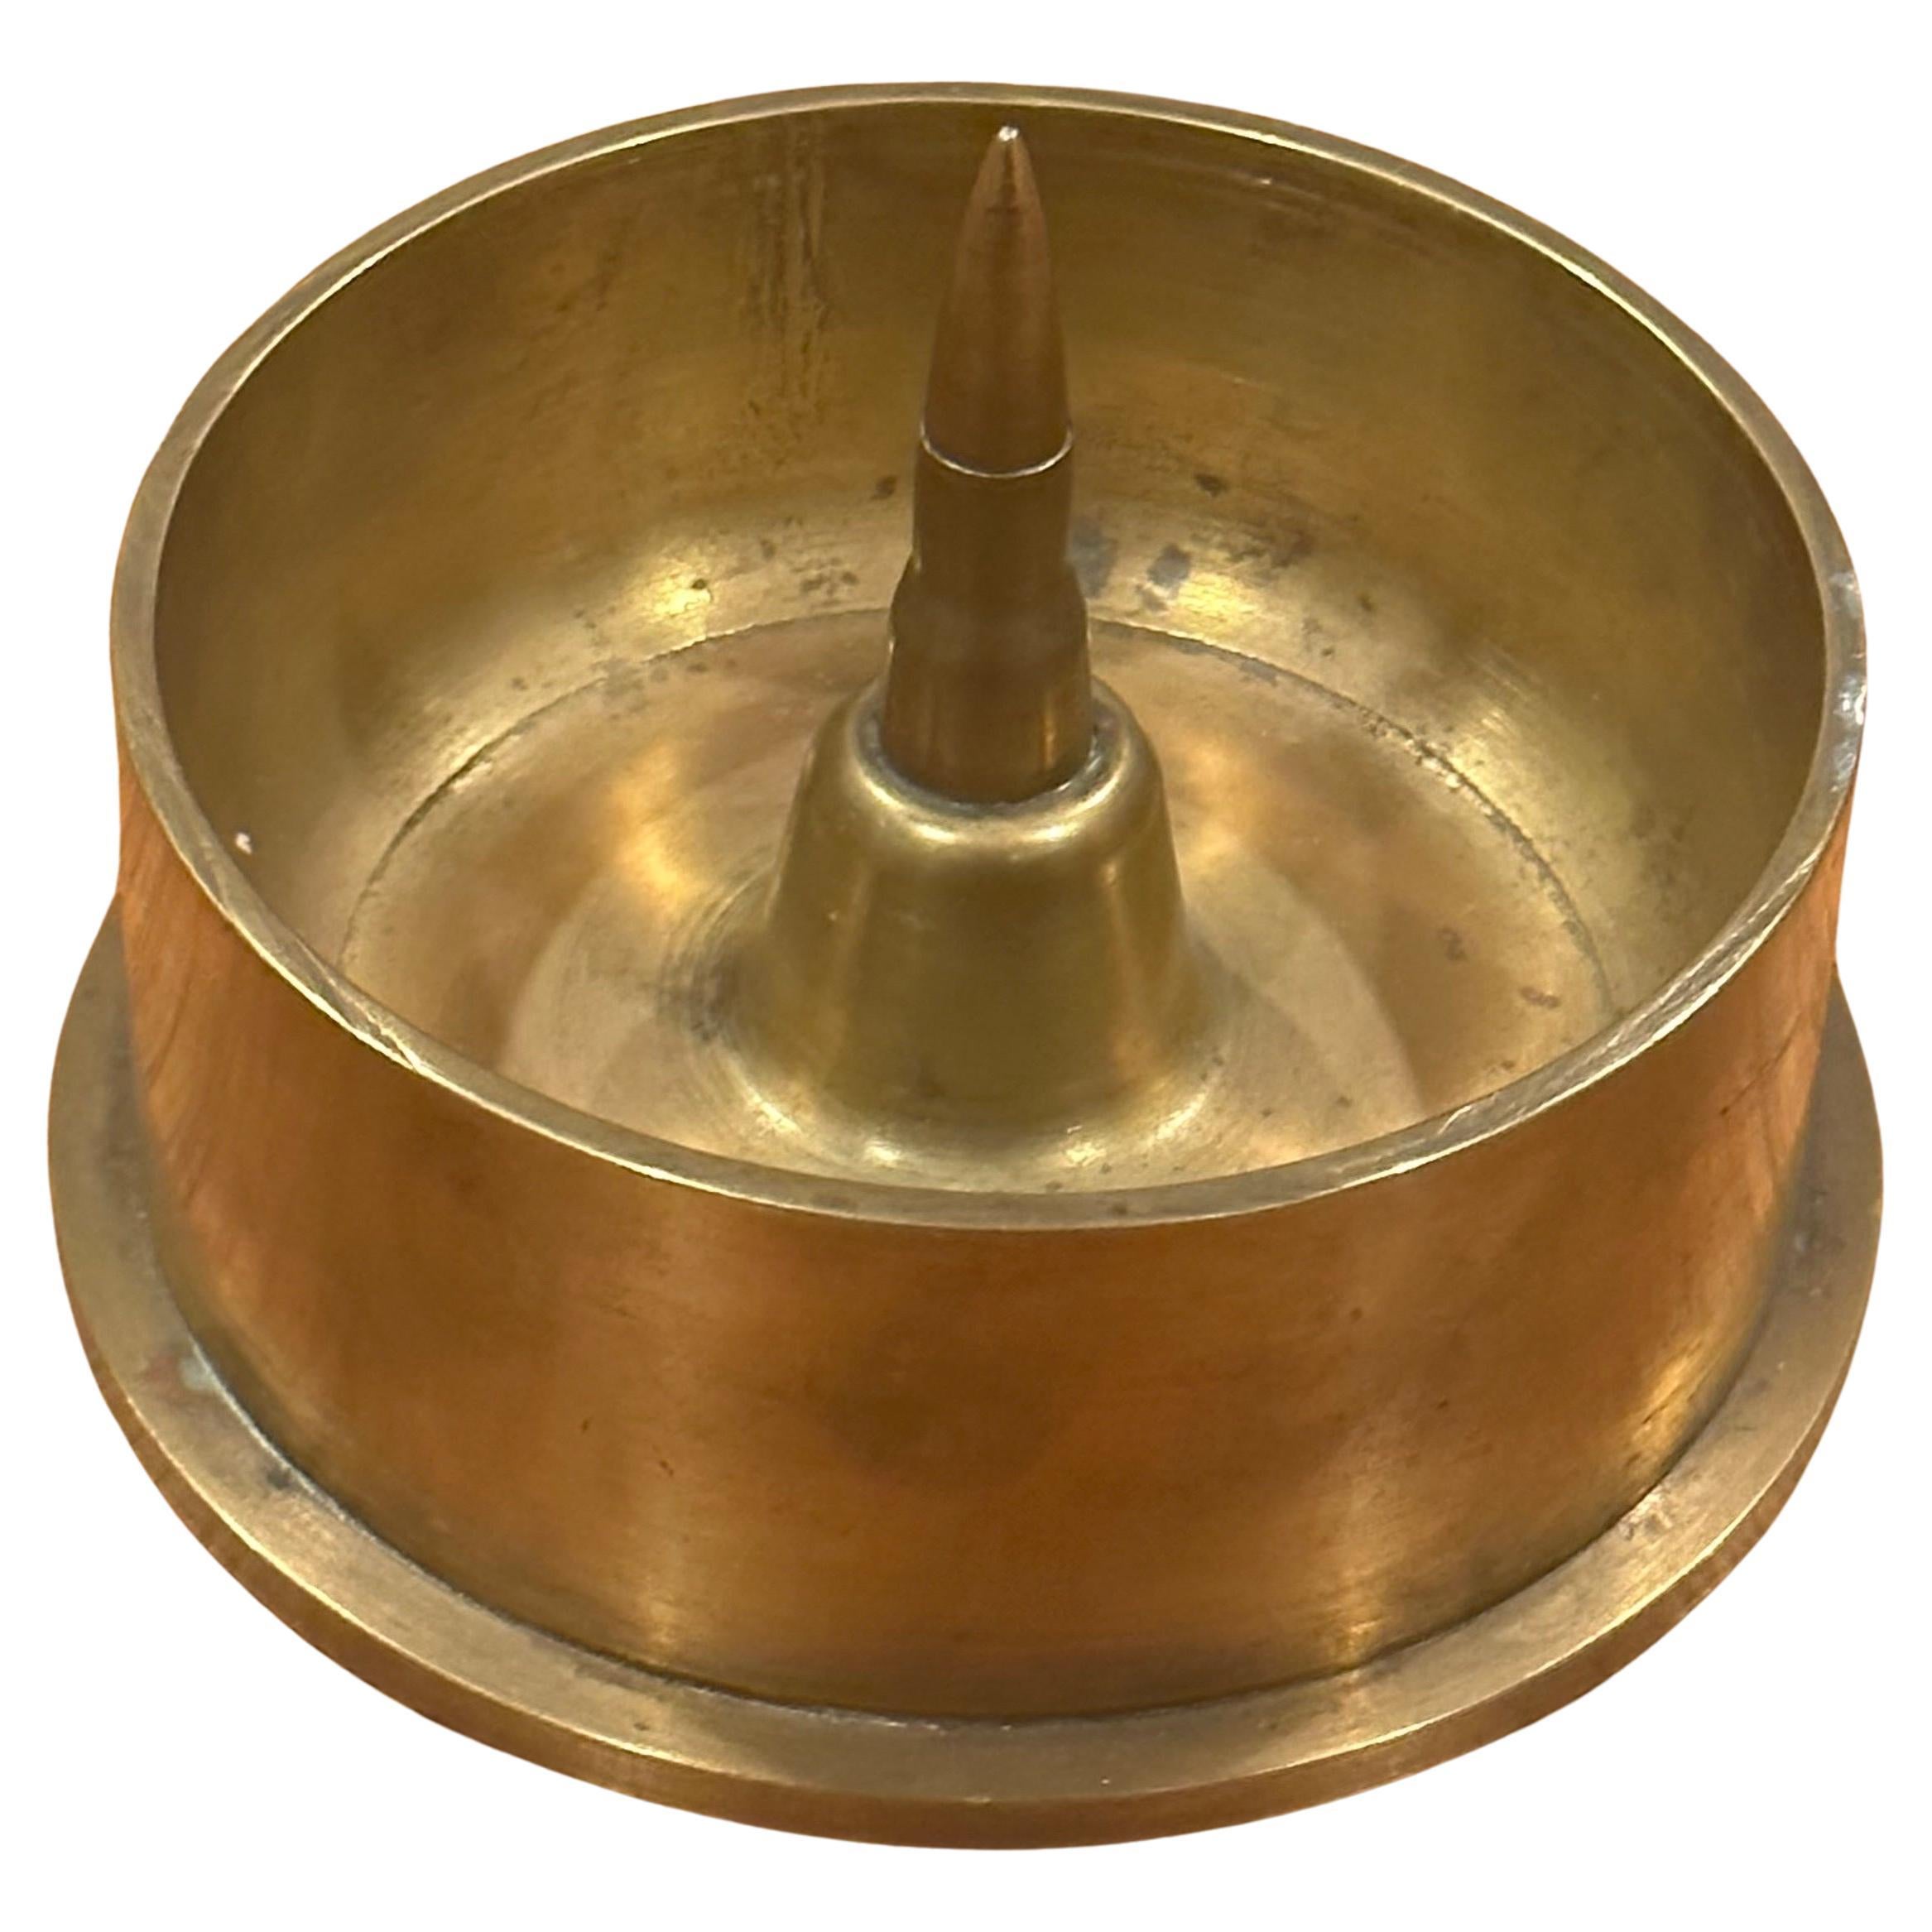 Unique military munition trench art, solid brass 